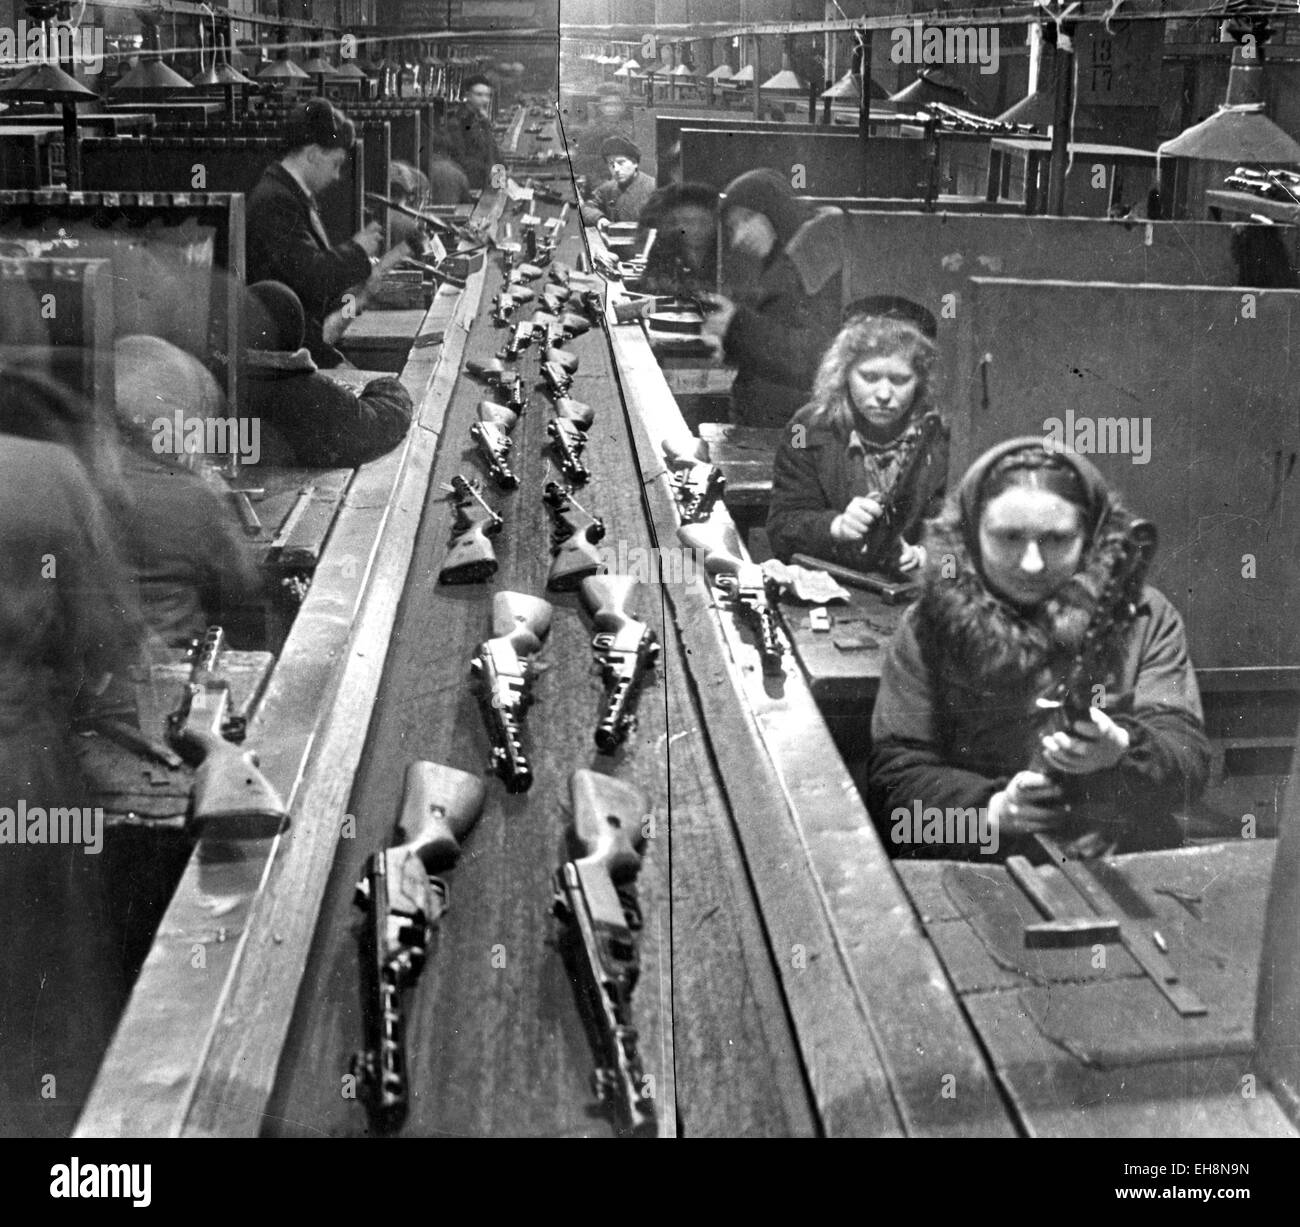 SOVIET ARMAMENTS Women workers fitting out  PPSH-41 submachine guns on a factory production line about 1943 Stock Photo